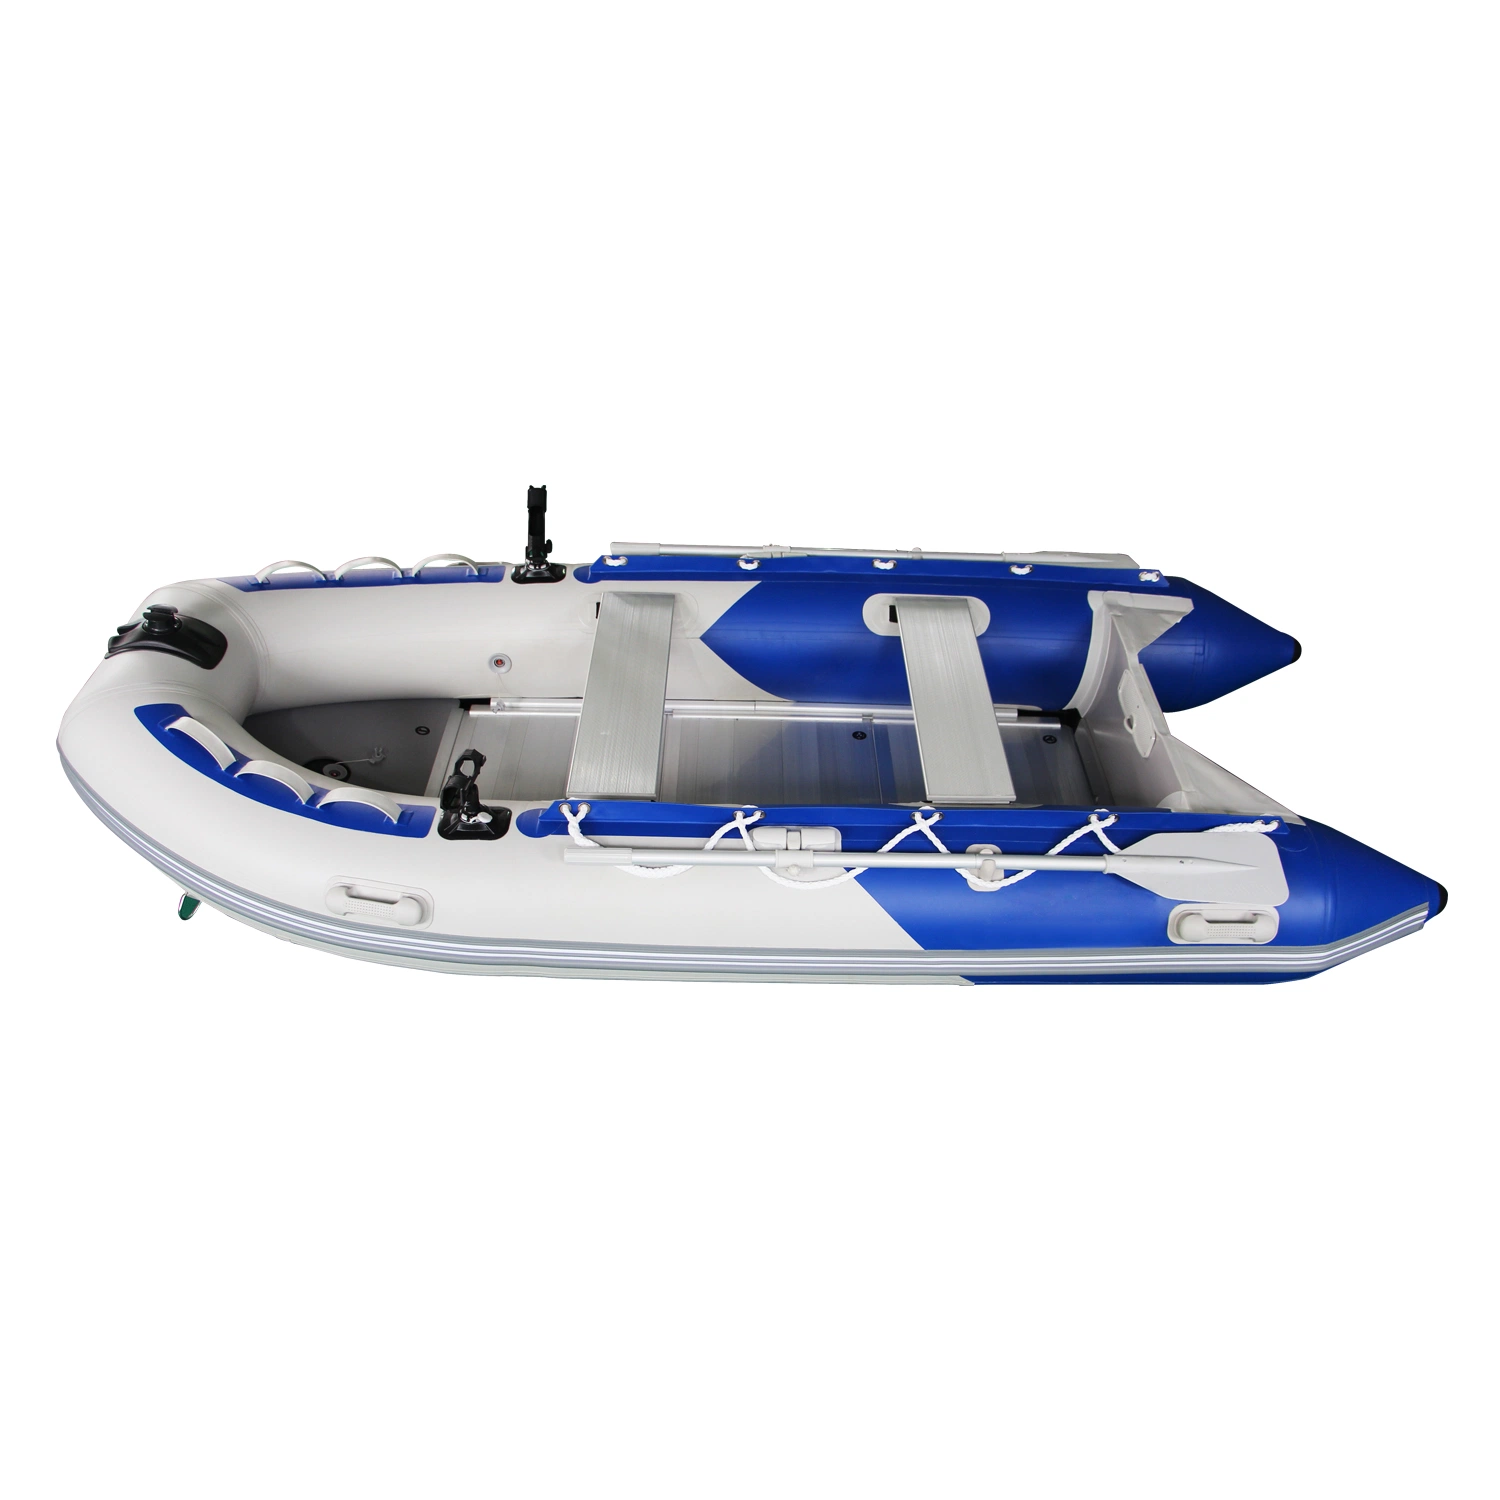 3.0m High Quality Rigid Inflatable Dinghy/Speed/Motor Boat